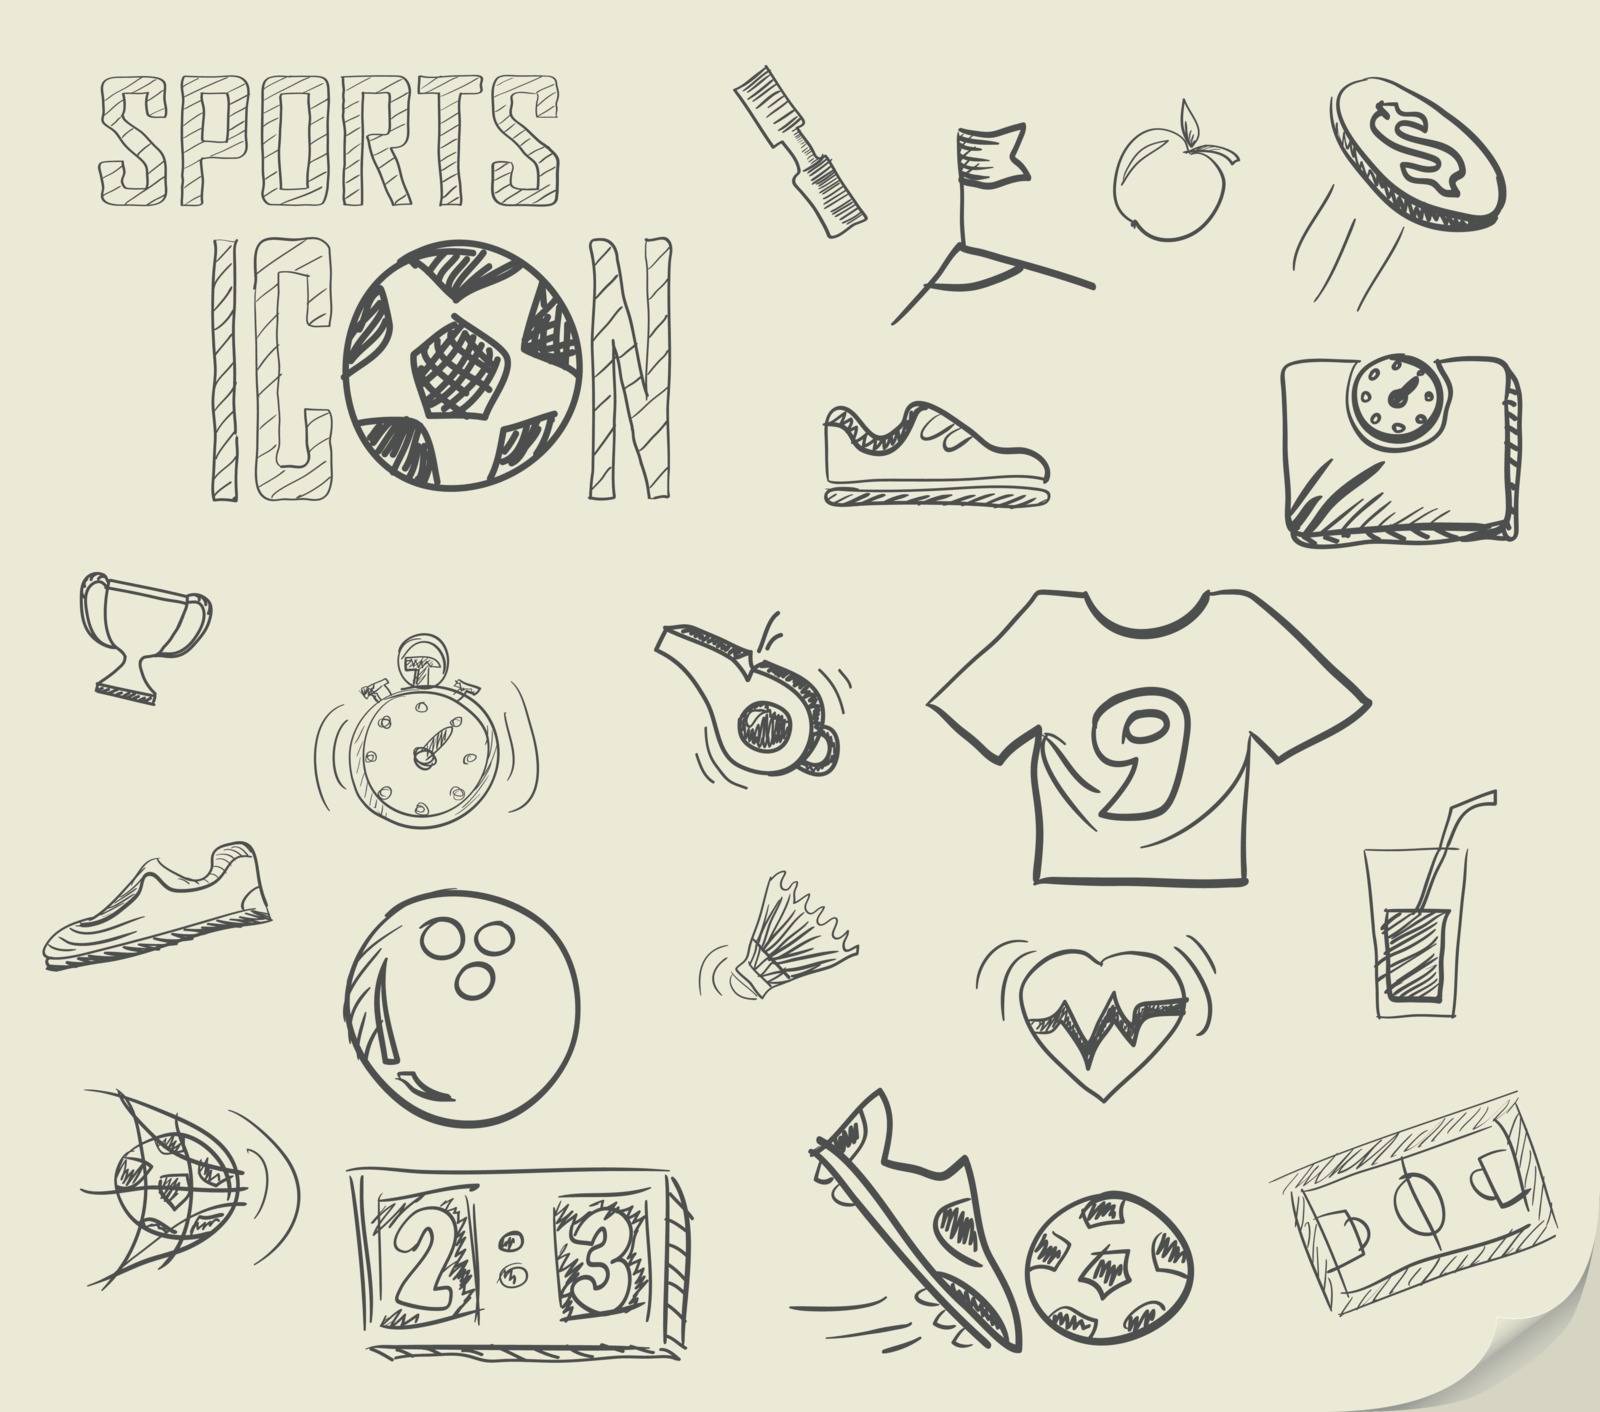 soccer doodles vector icon set in eps 10